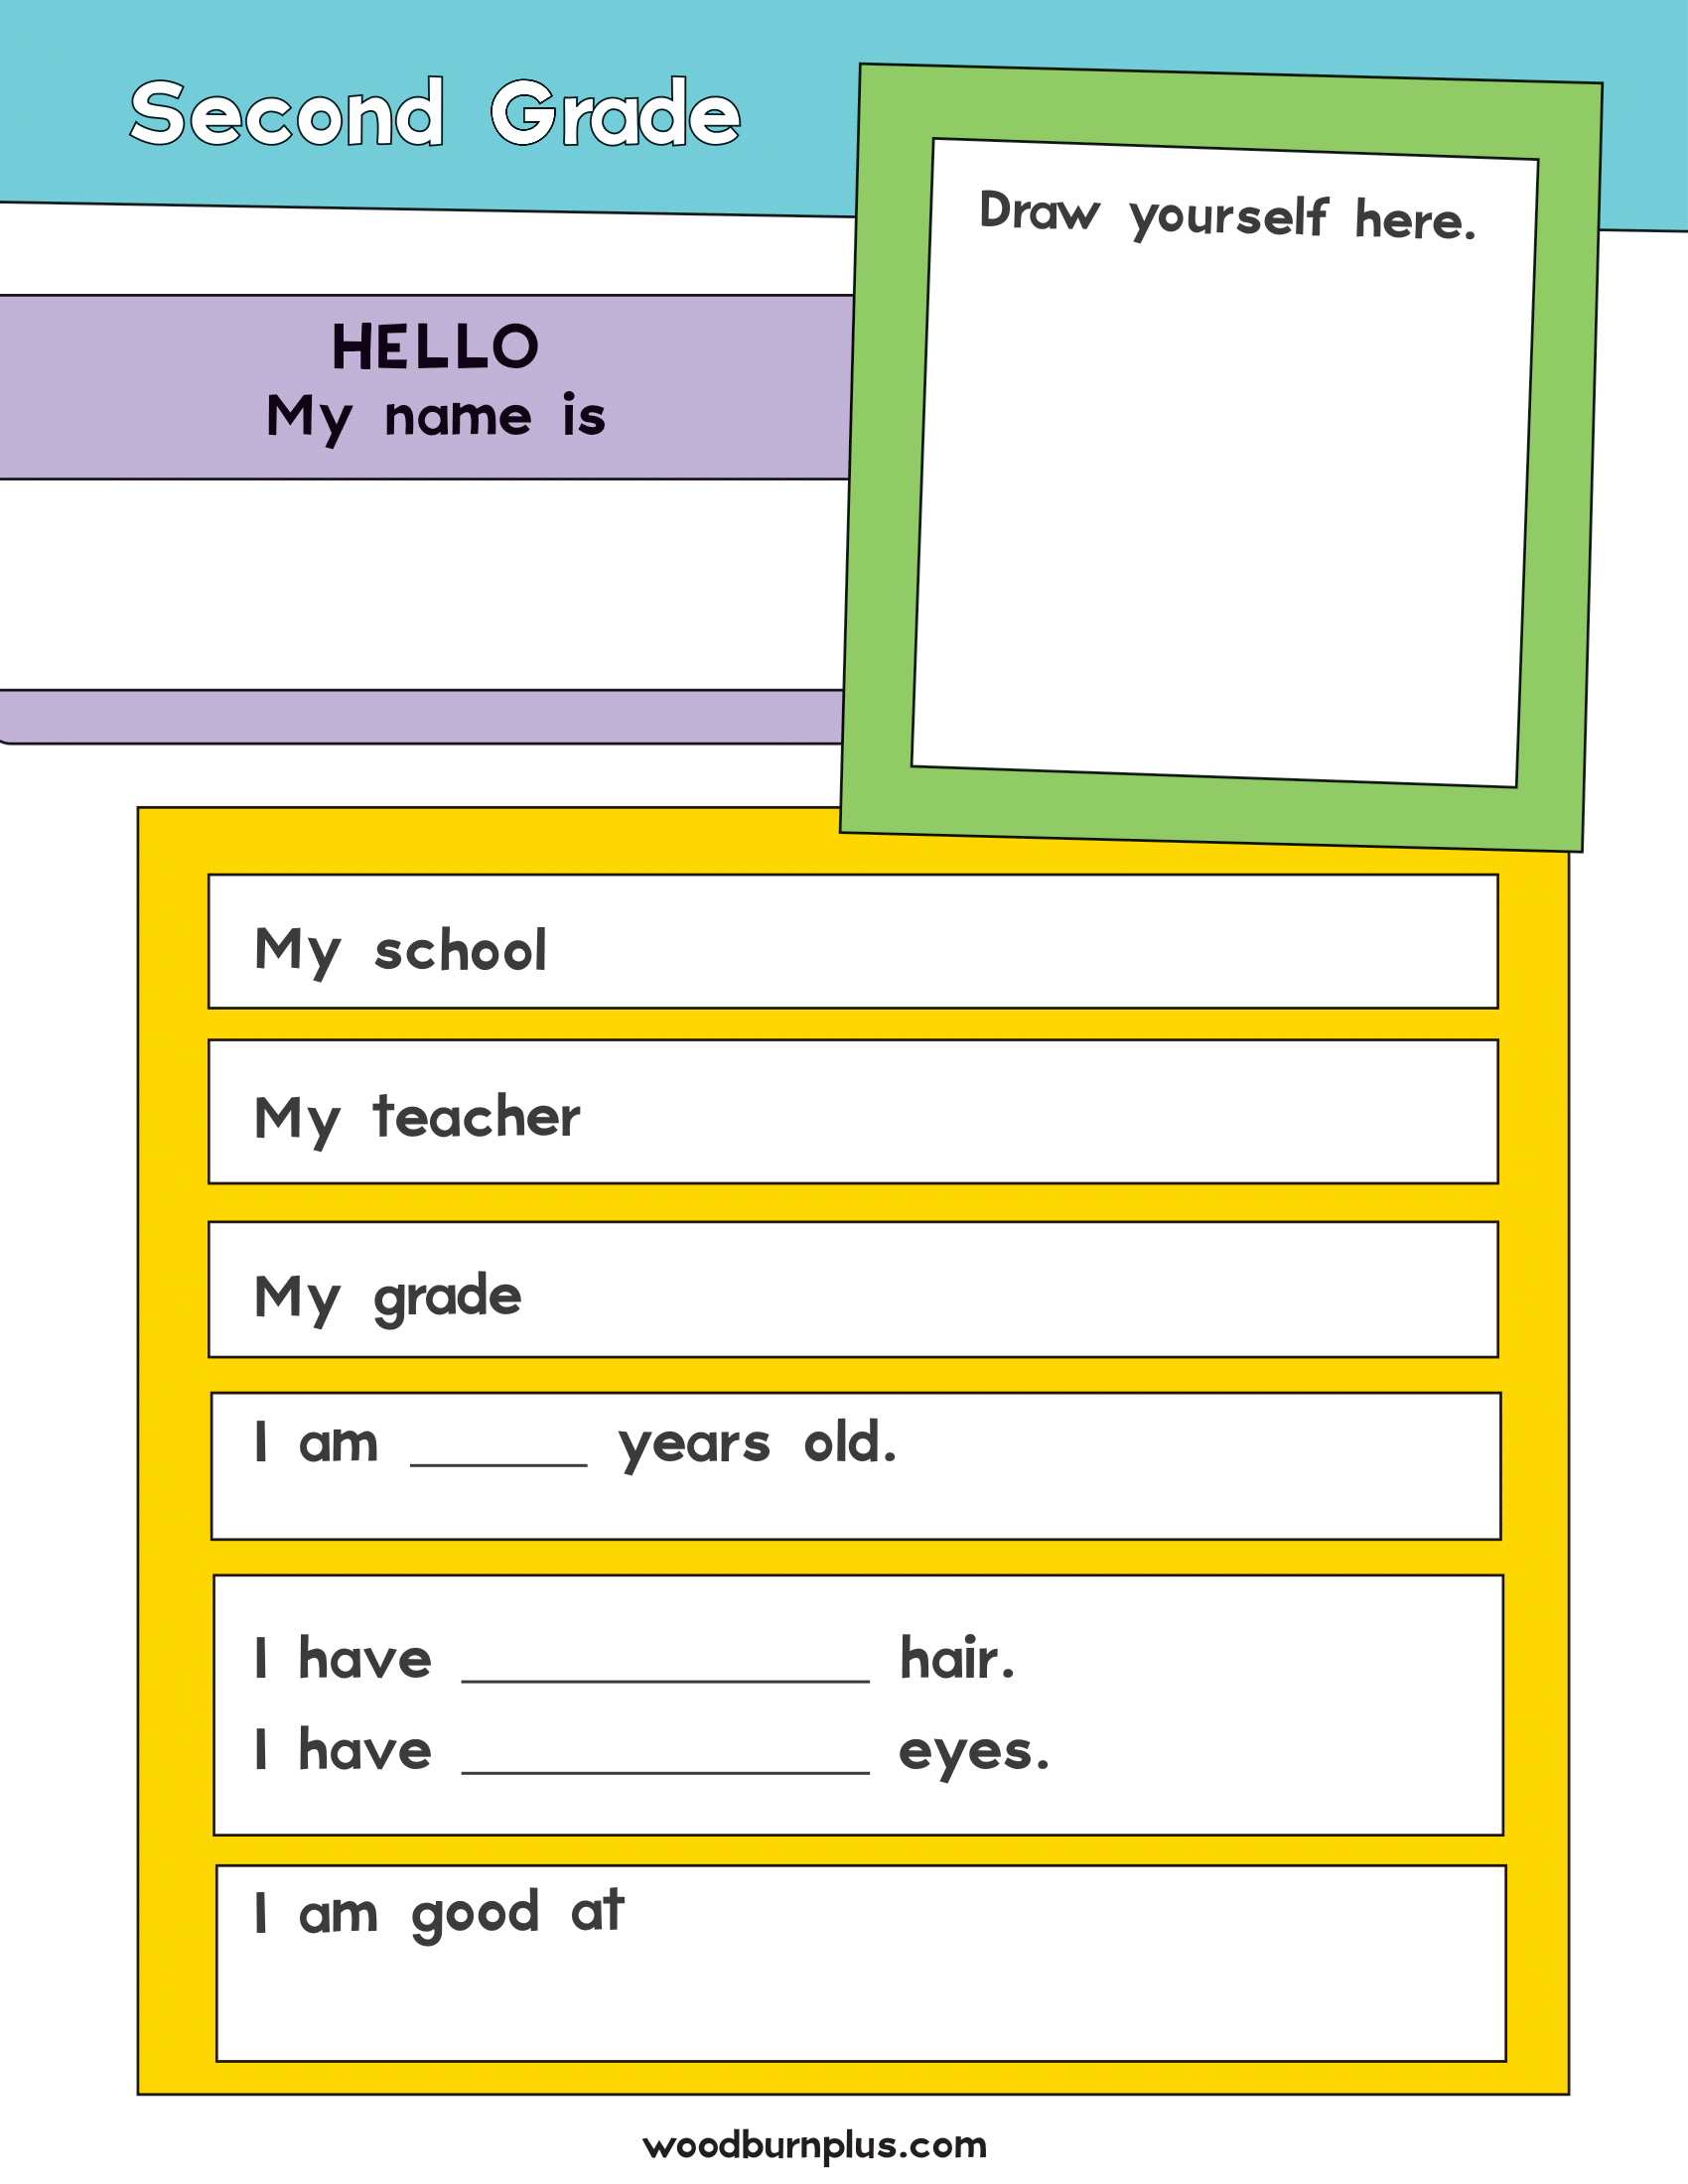 All About Me - Second Grade